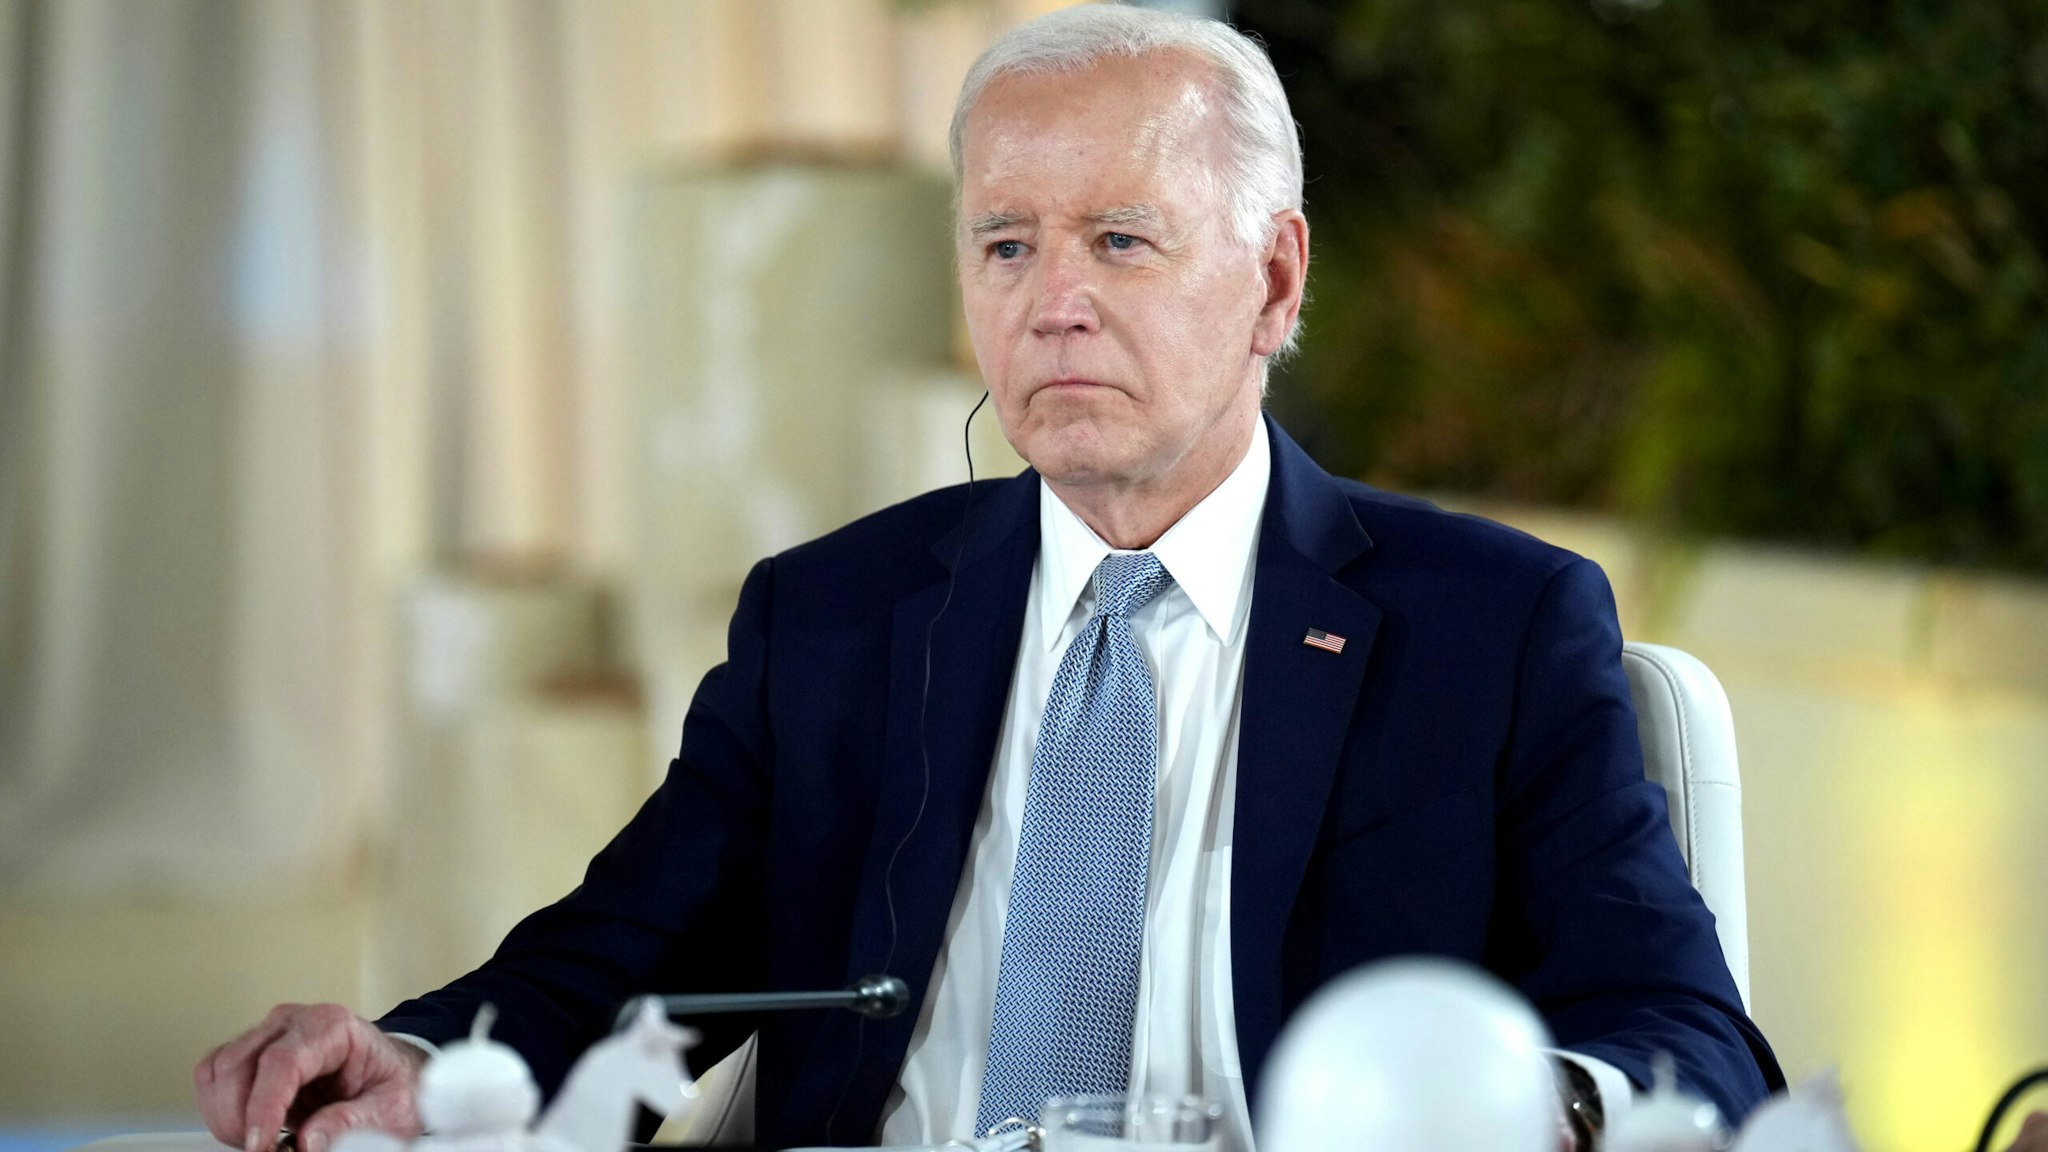 FASANO, ITALY - JUNE 13: U.S. President Joe Biden attends a roundtable session entitled 